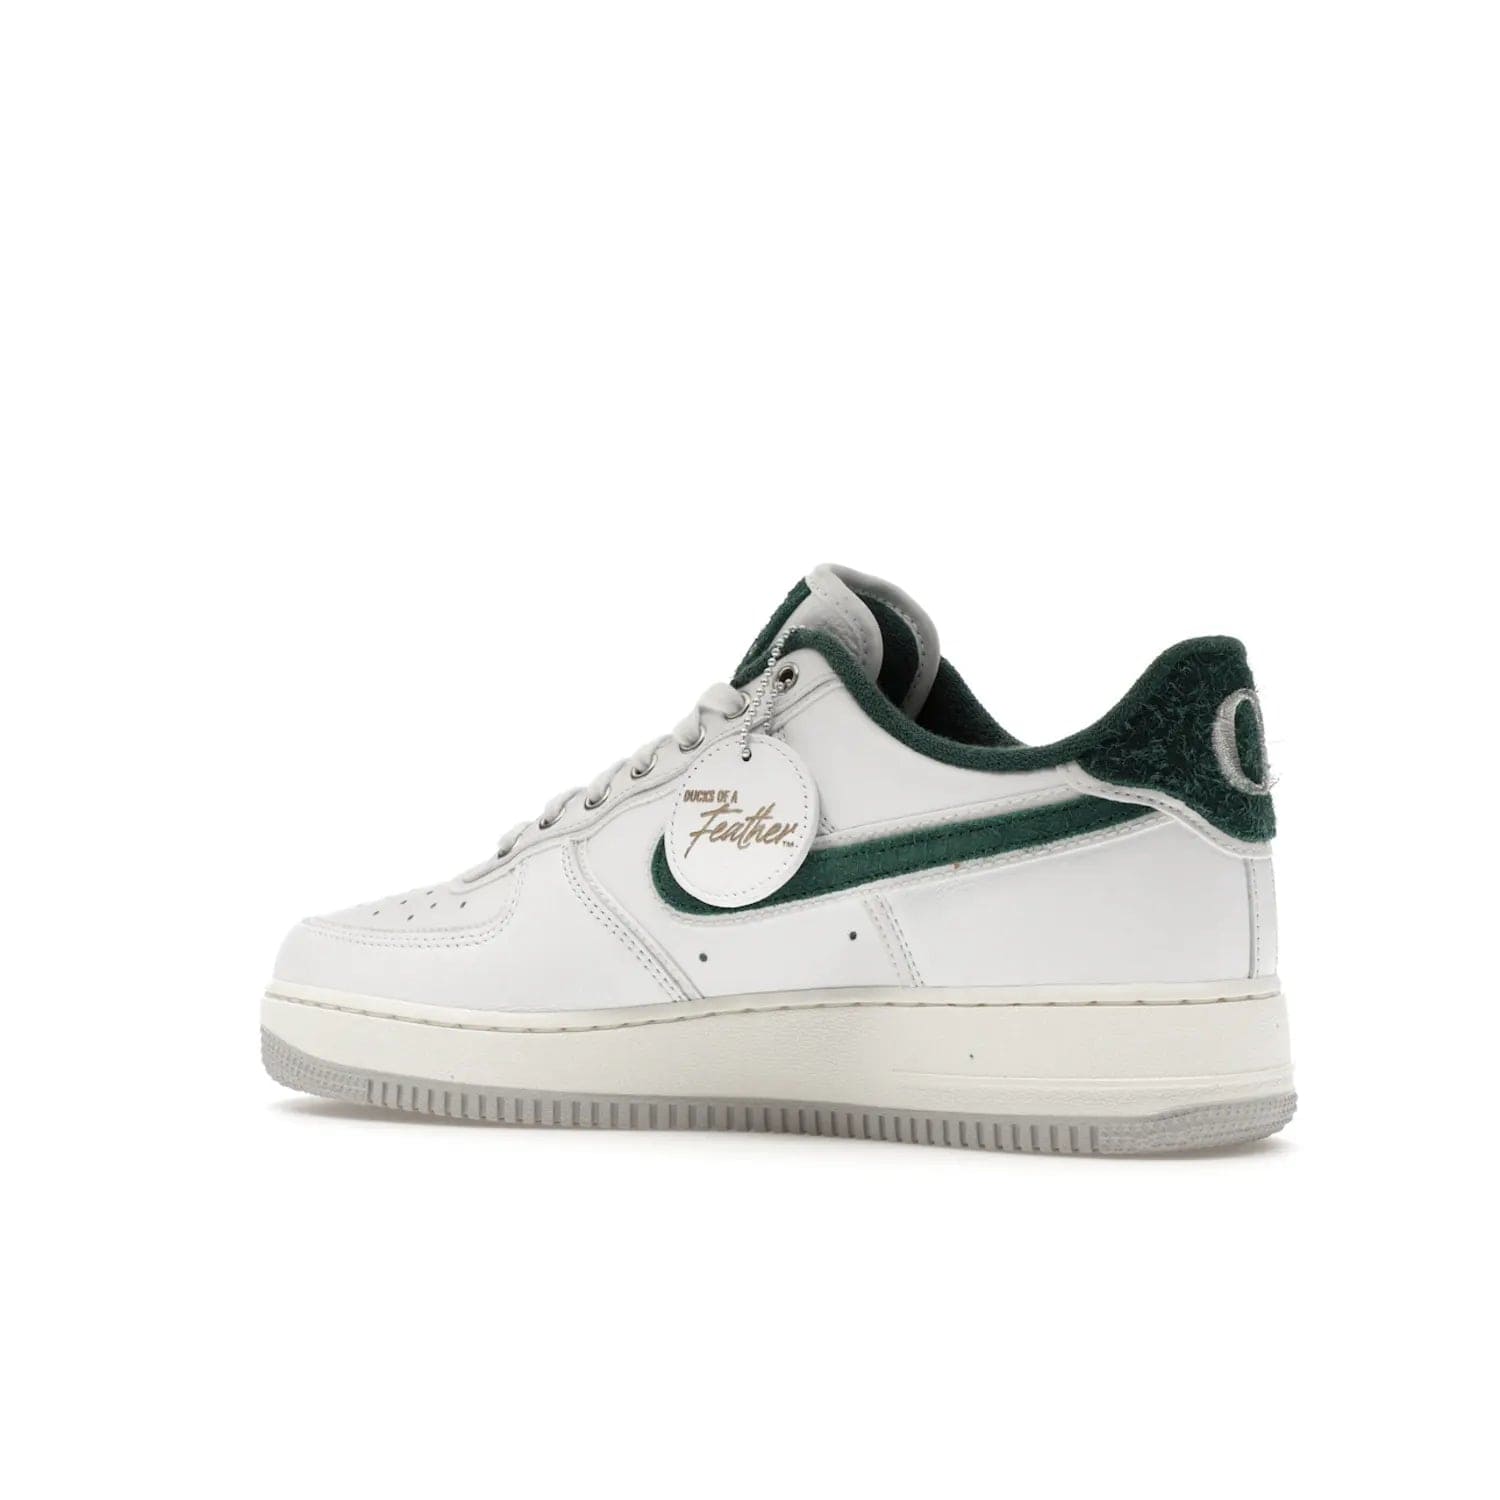 Nike Air Force 1 Low '07 Premium University of Oregon PE - Image 22 - Only at www.BallersClubKickz.com - The Nike Air Force 1 Low '07 Premium. Special Oregon University colorway. White base with green and sail accents. Cushioned rubber midsole. Comfort and style. Support your school!